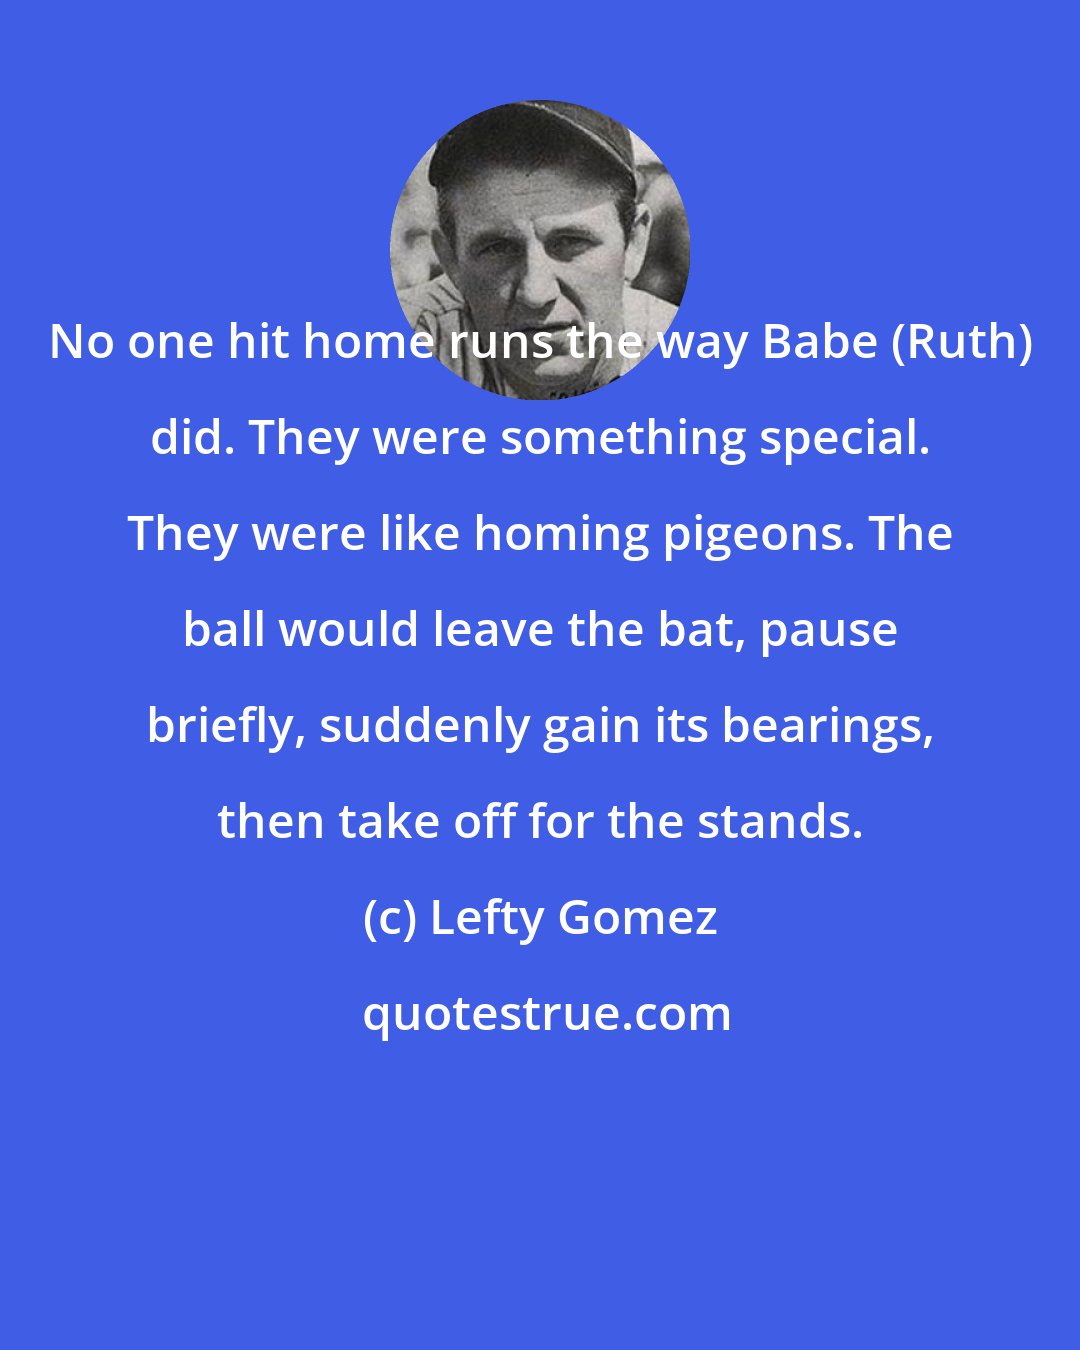 Lefty Gomez: No one hit home runs the way Babe (Ruth) did. They were something special. They were like homing pigeons. The ball would leave the bat, pause briefly, suddenly gain its bearings, then take off for the stands.